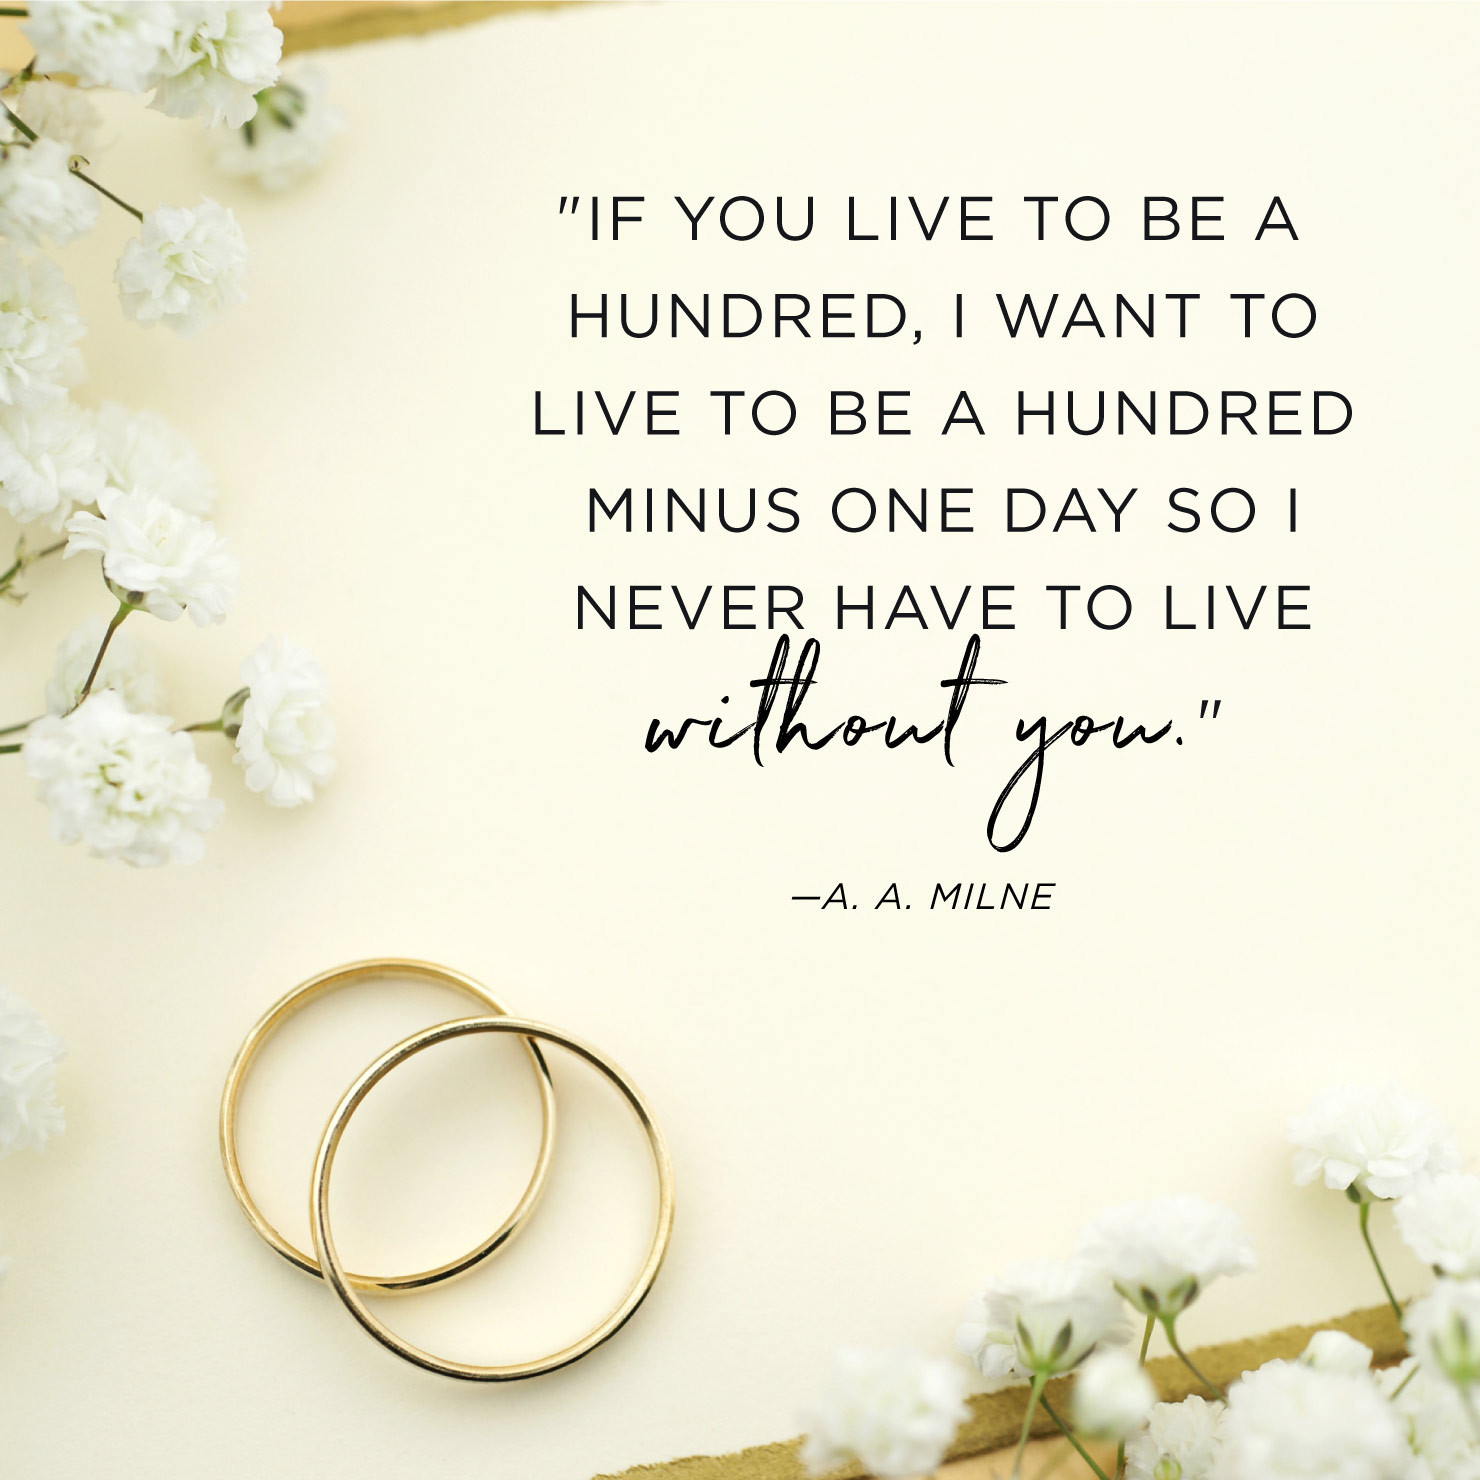 Quotes For Weddings Anniversary
 60 Happy Anniversary Quotes to Celebrate Your Love